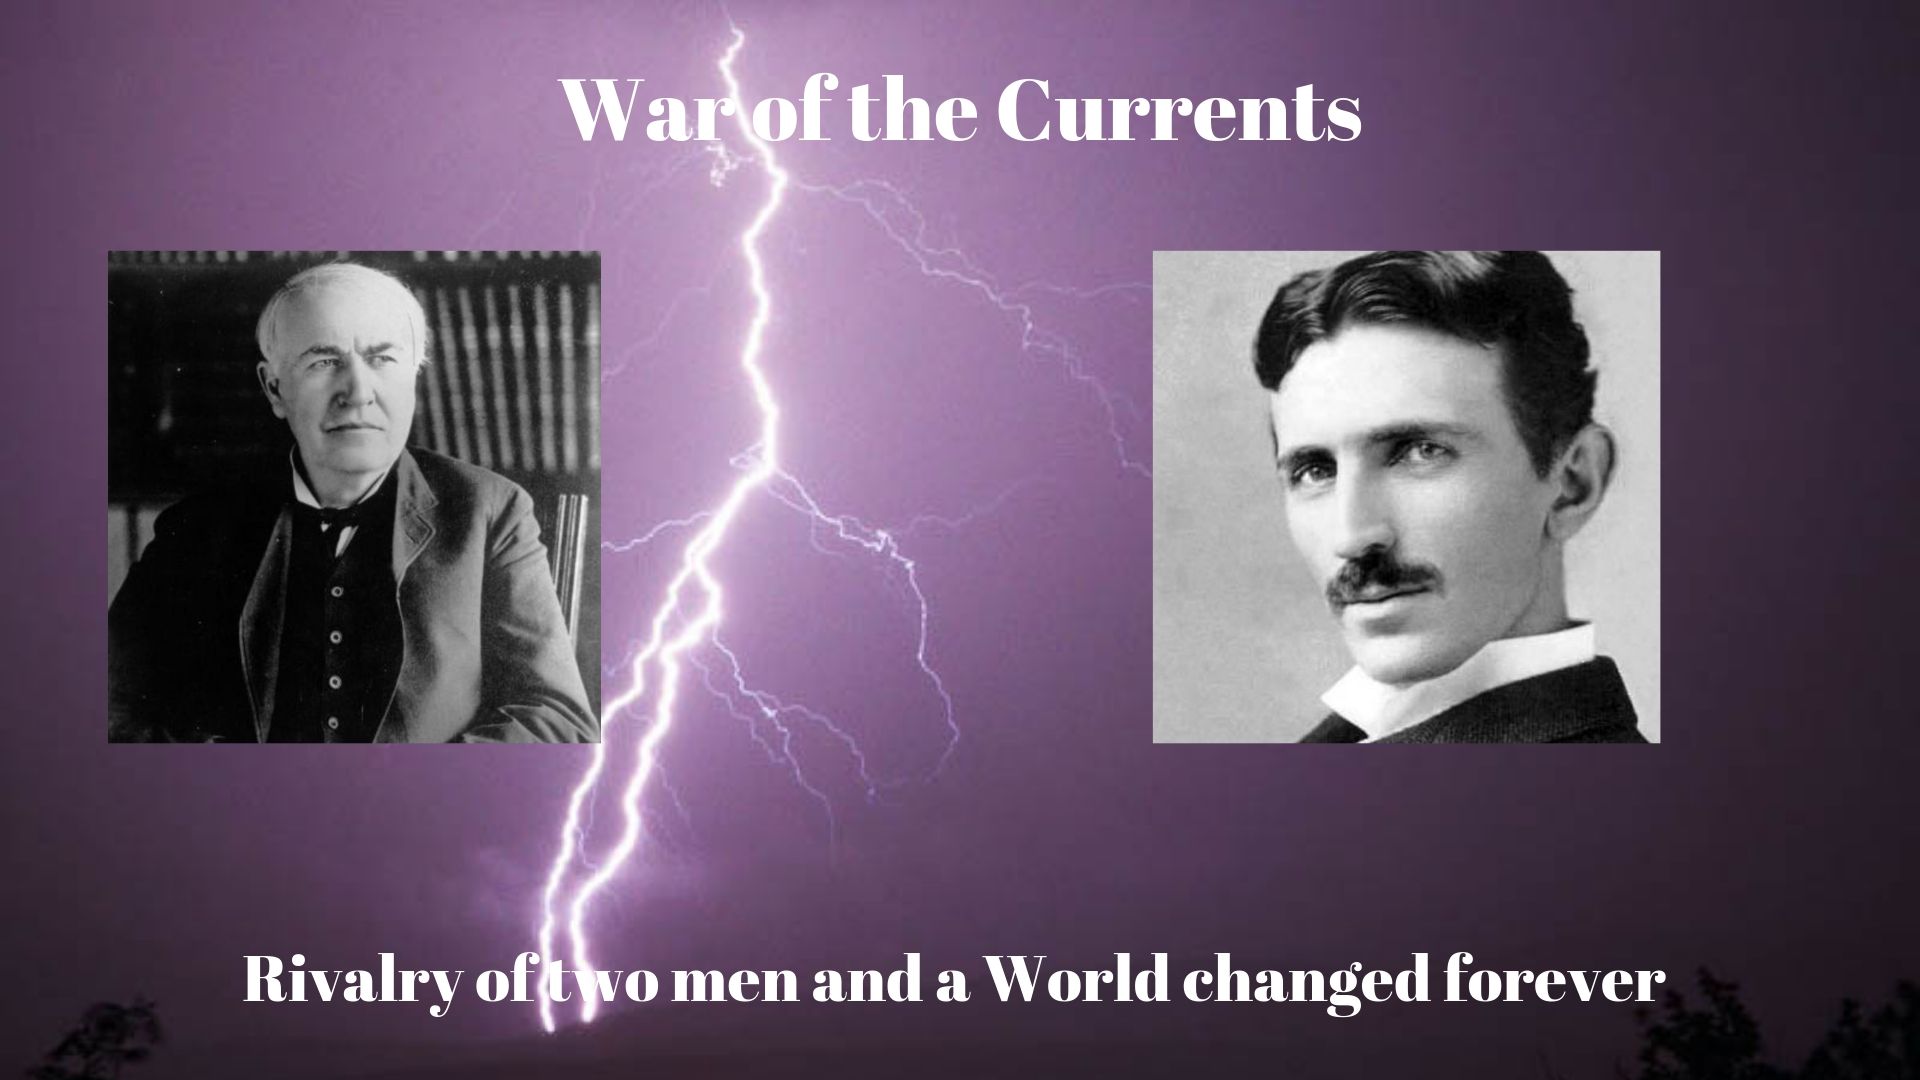 CLILstore unit 7684: The War of the Currents